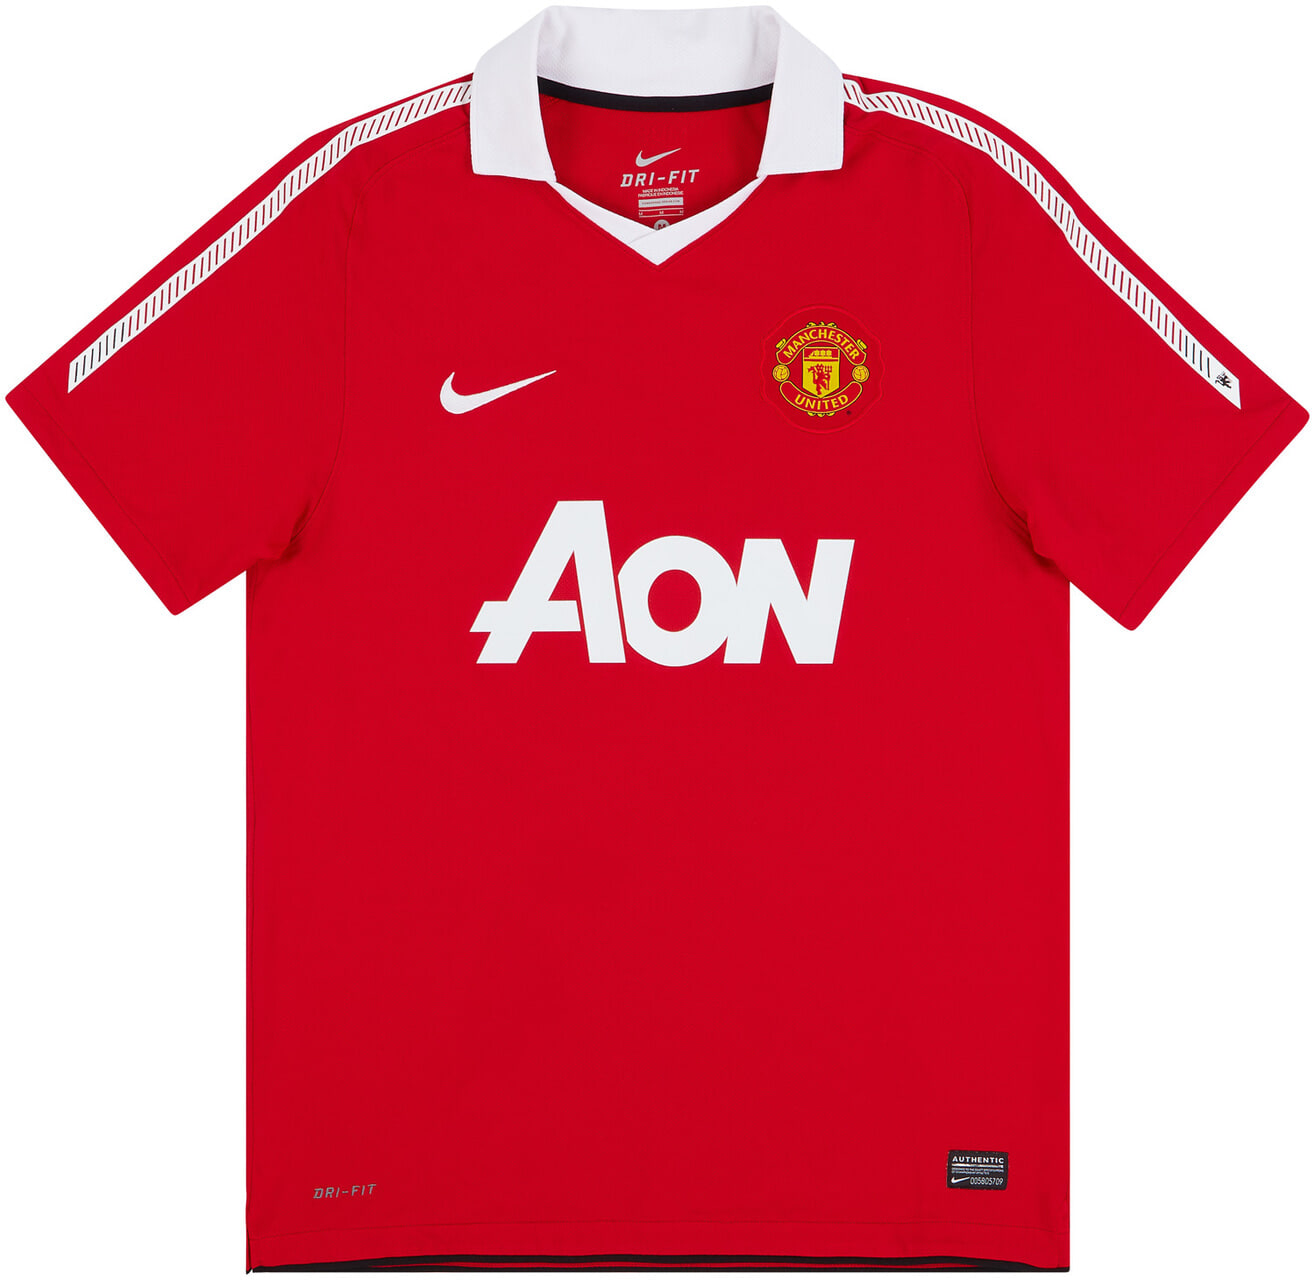 2010-11 Manchester United Home Shirt - 7/10 -